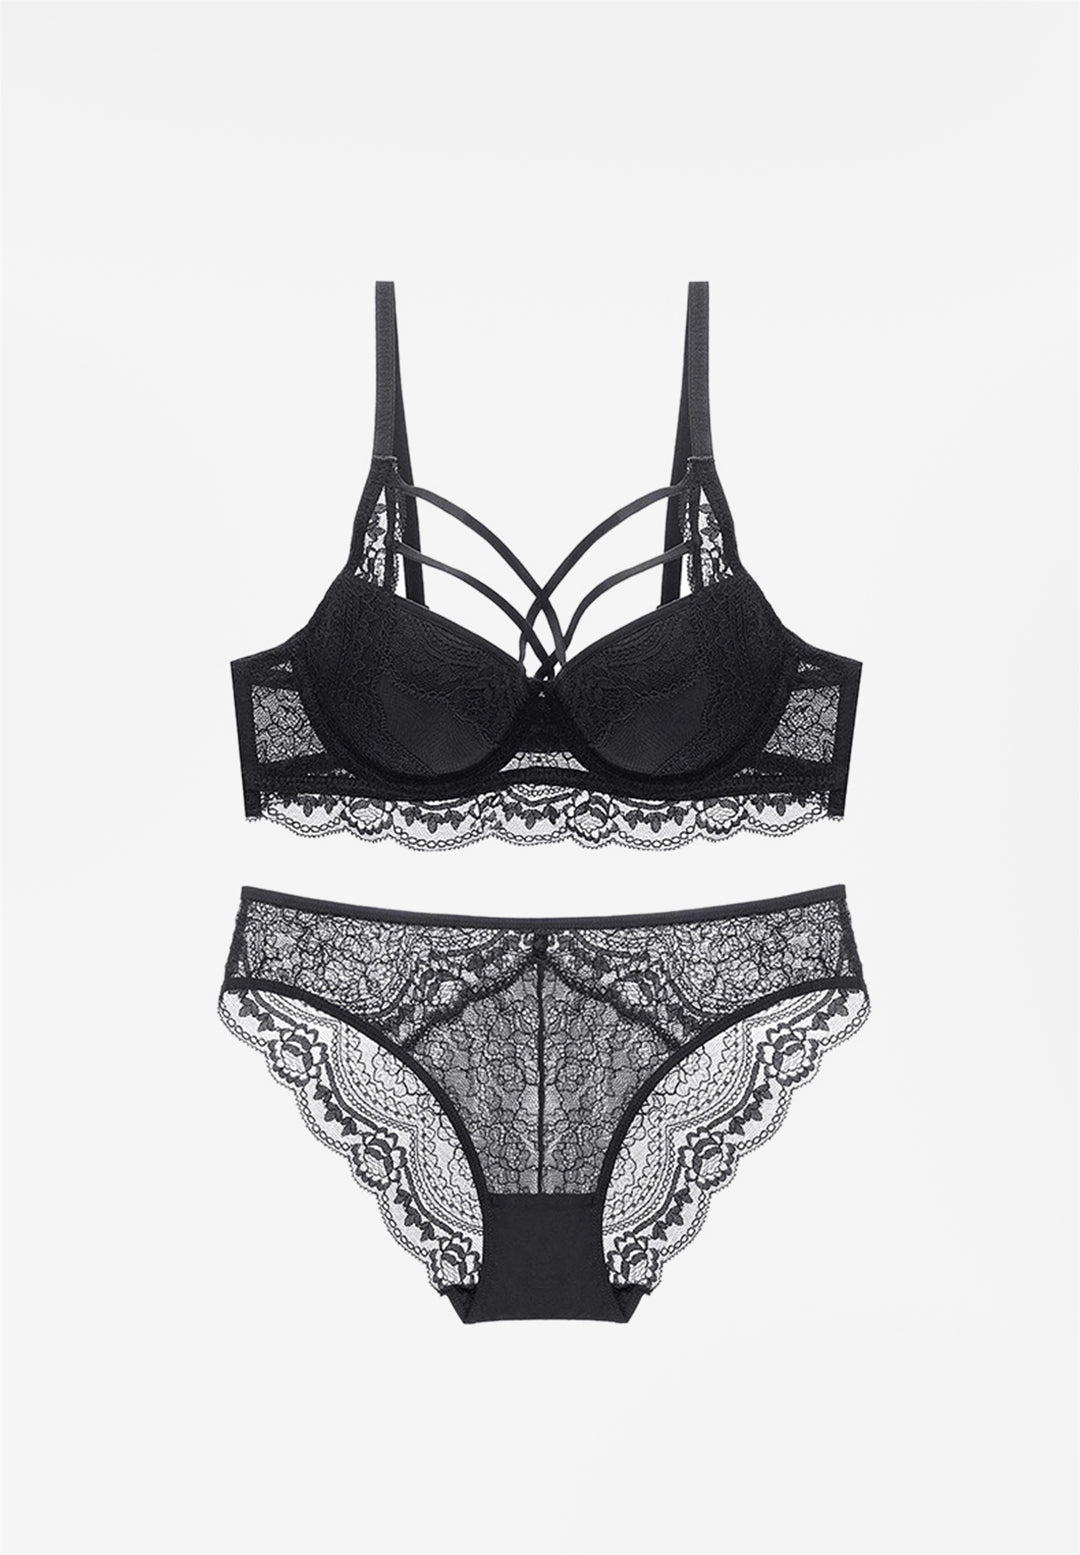 Padded Underwired Lace Bra Set